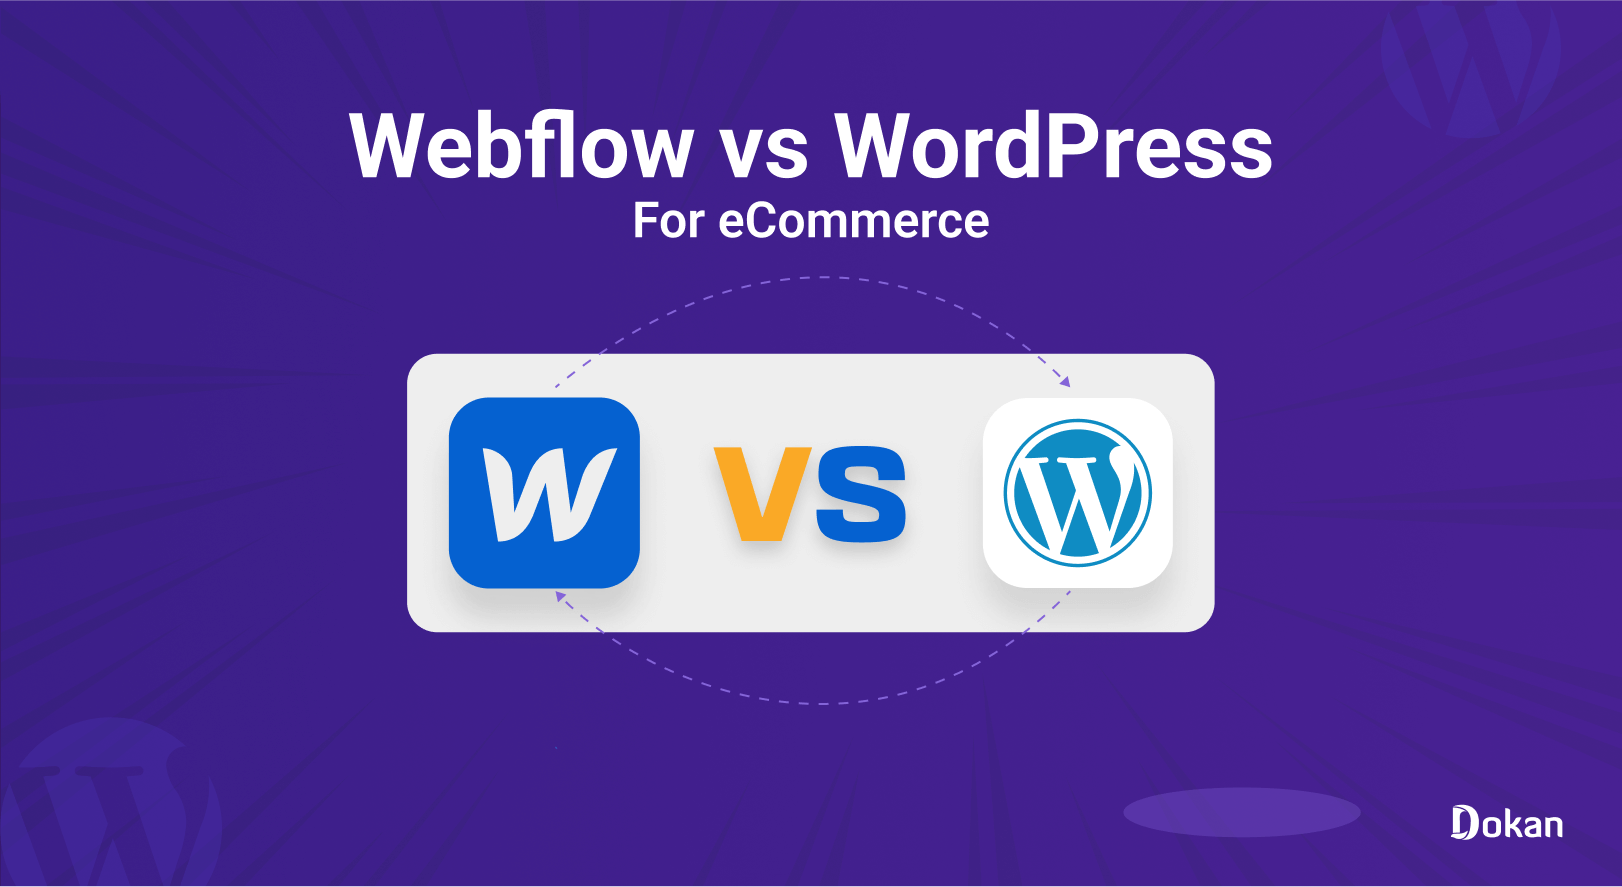 This image shows Webflow vs WordPress for eCommerce stores.